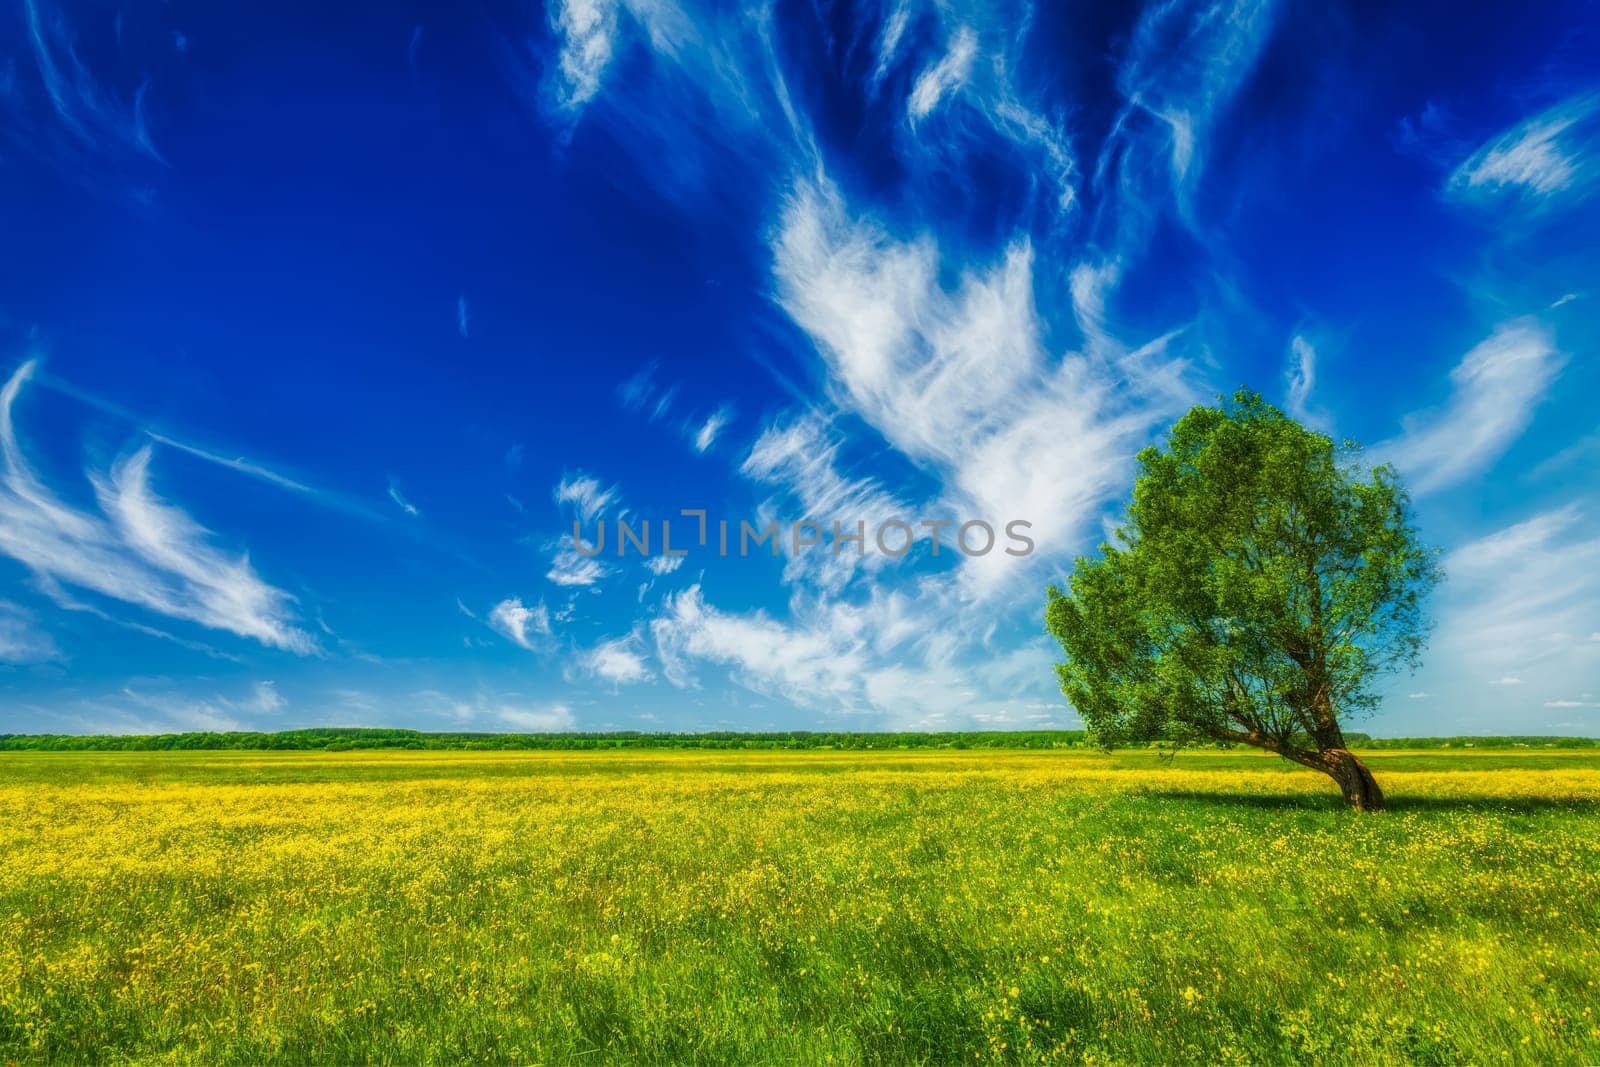 Spring summer green field scenery landscape with single tree by dimol